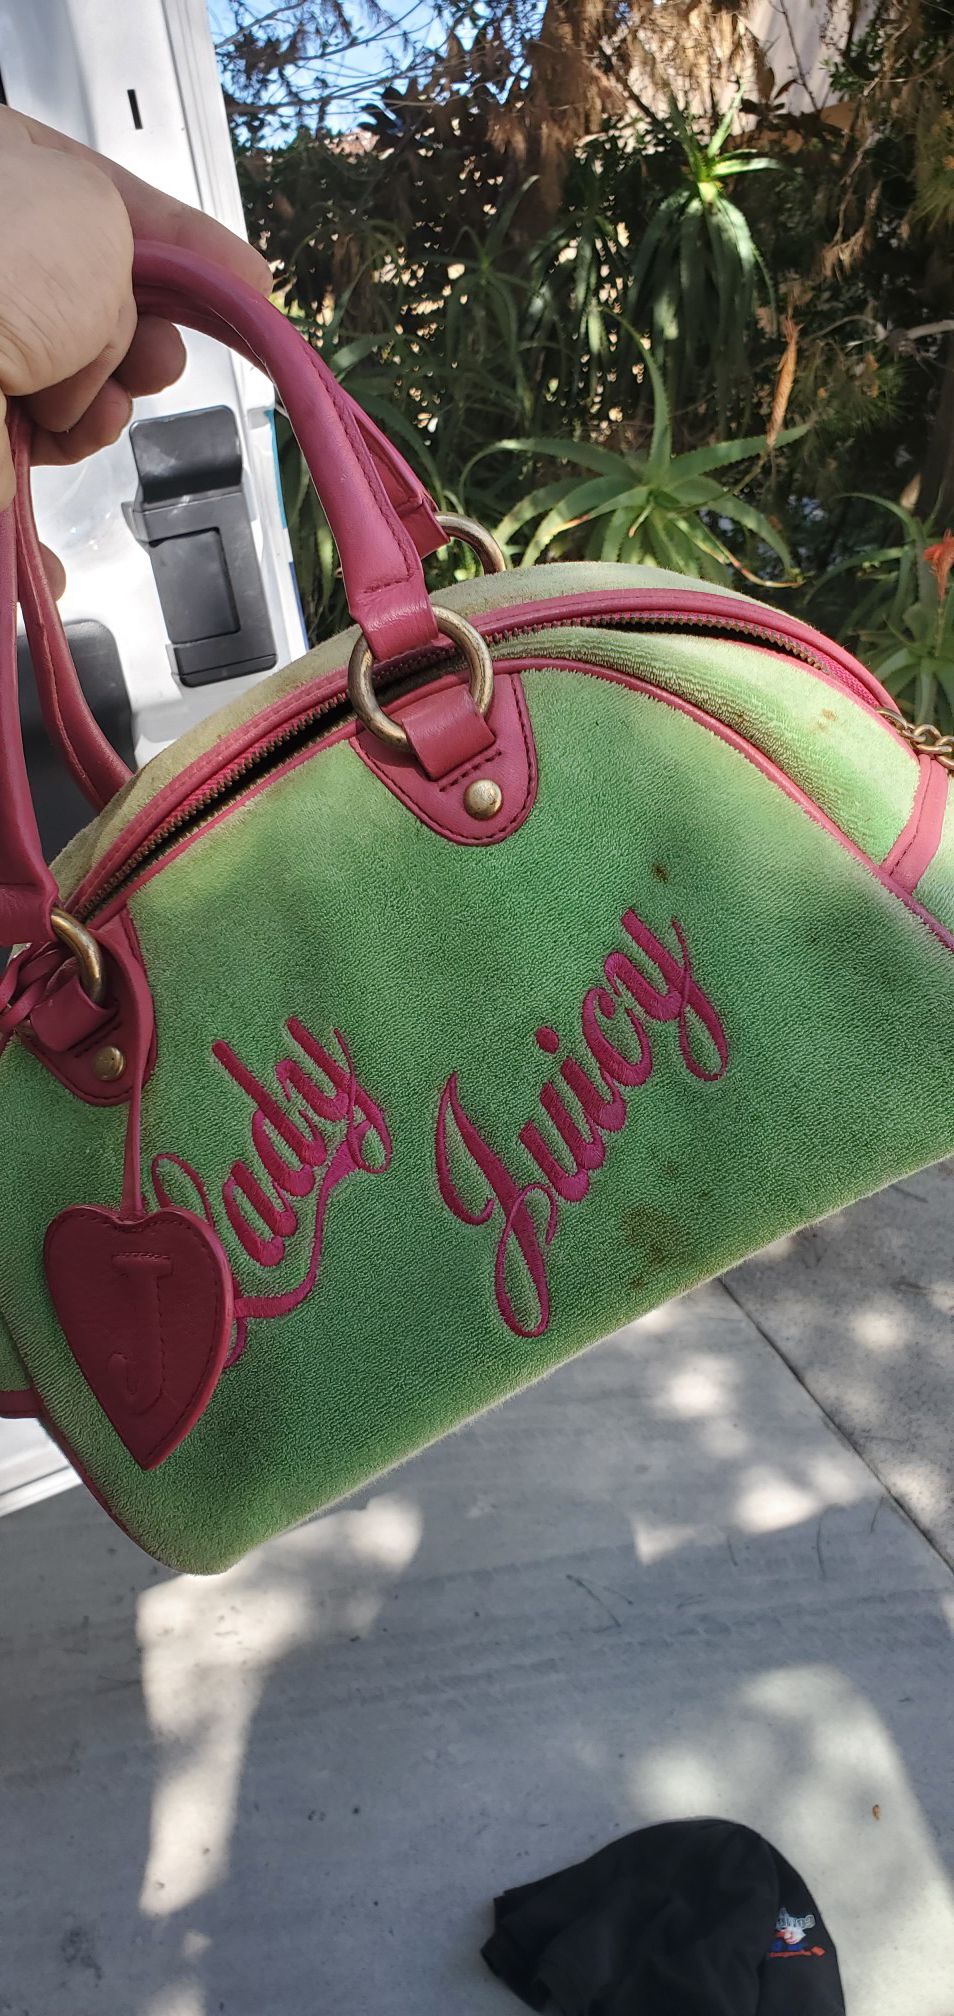 Juicy couture hand bag. Purse